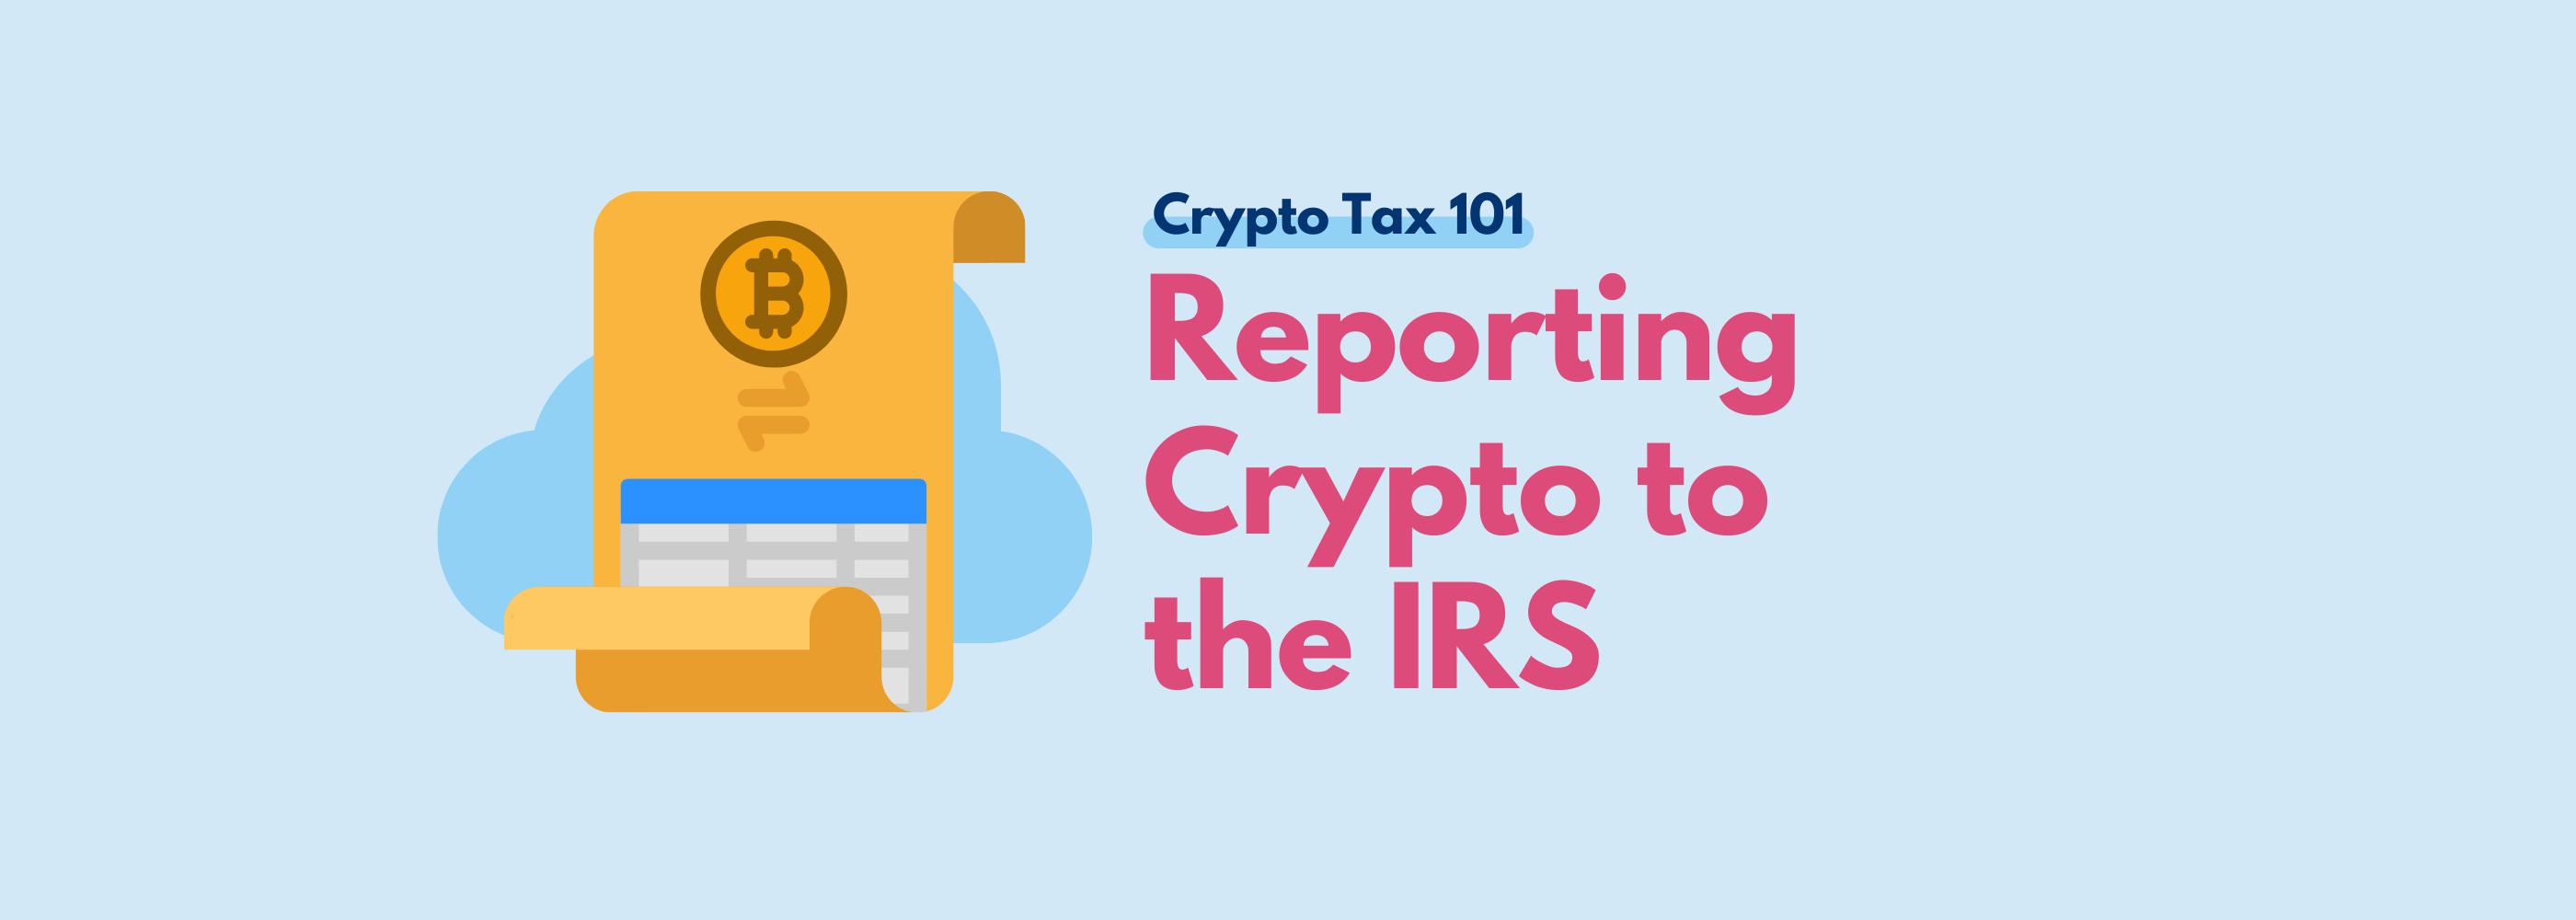 Koinly Crypto Tax Calculator - How to Report Crypto to the IRS